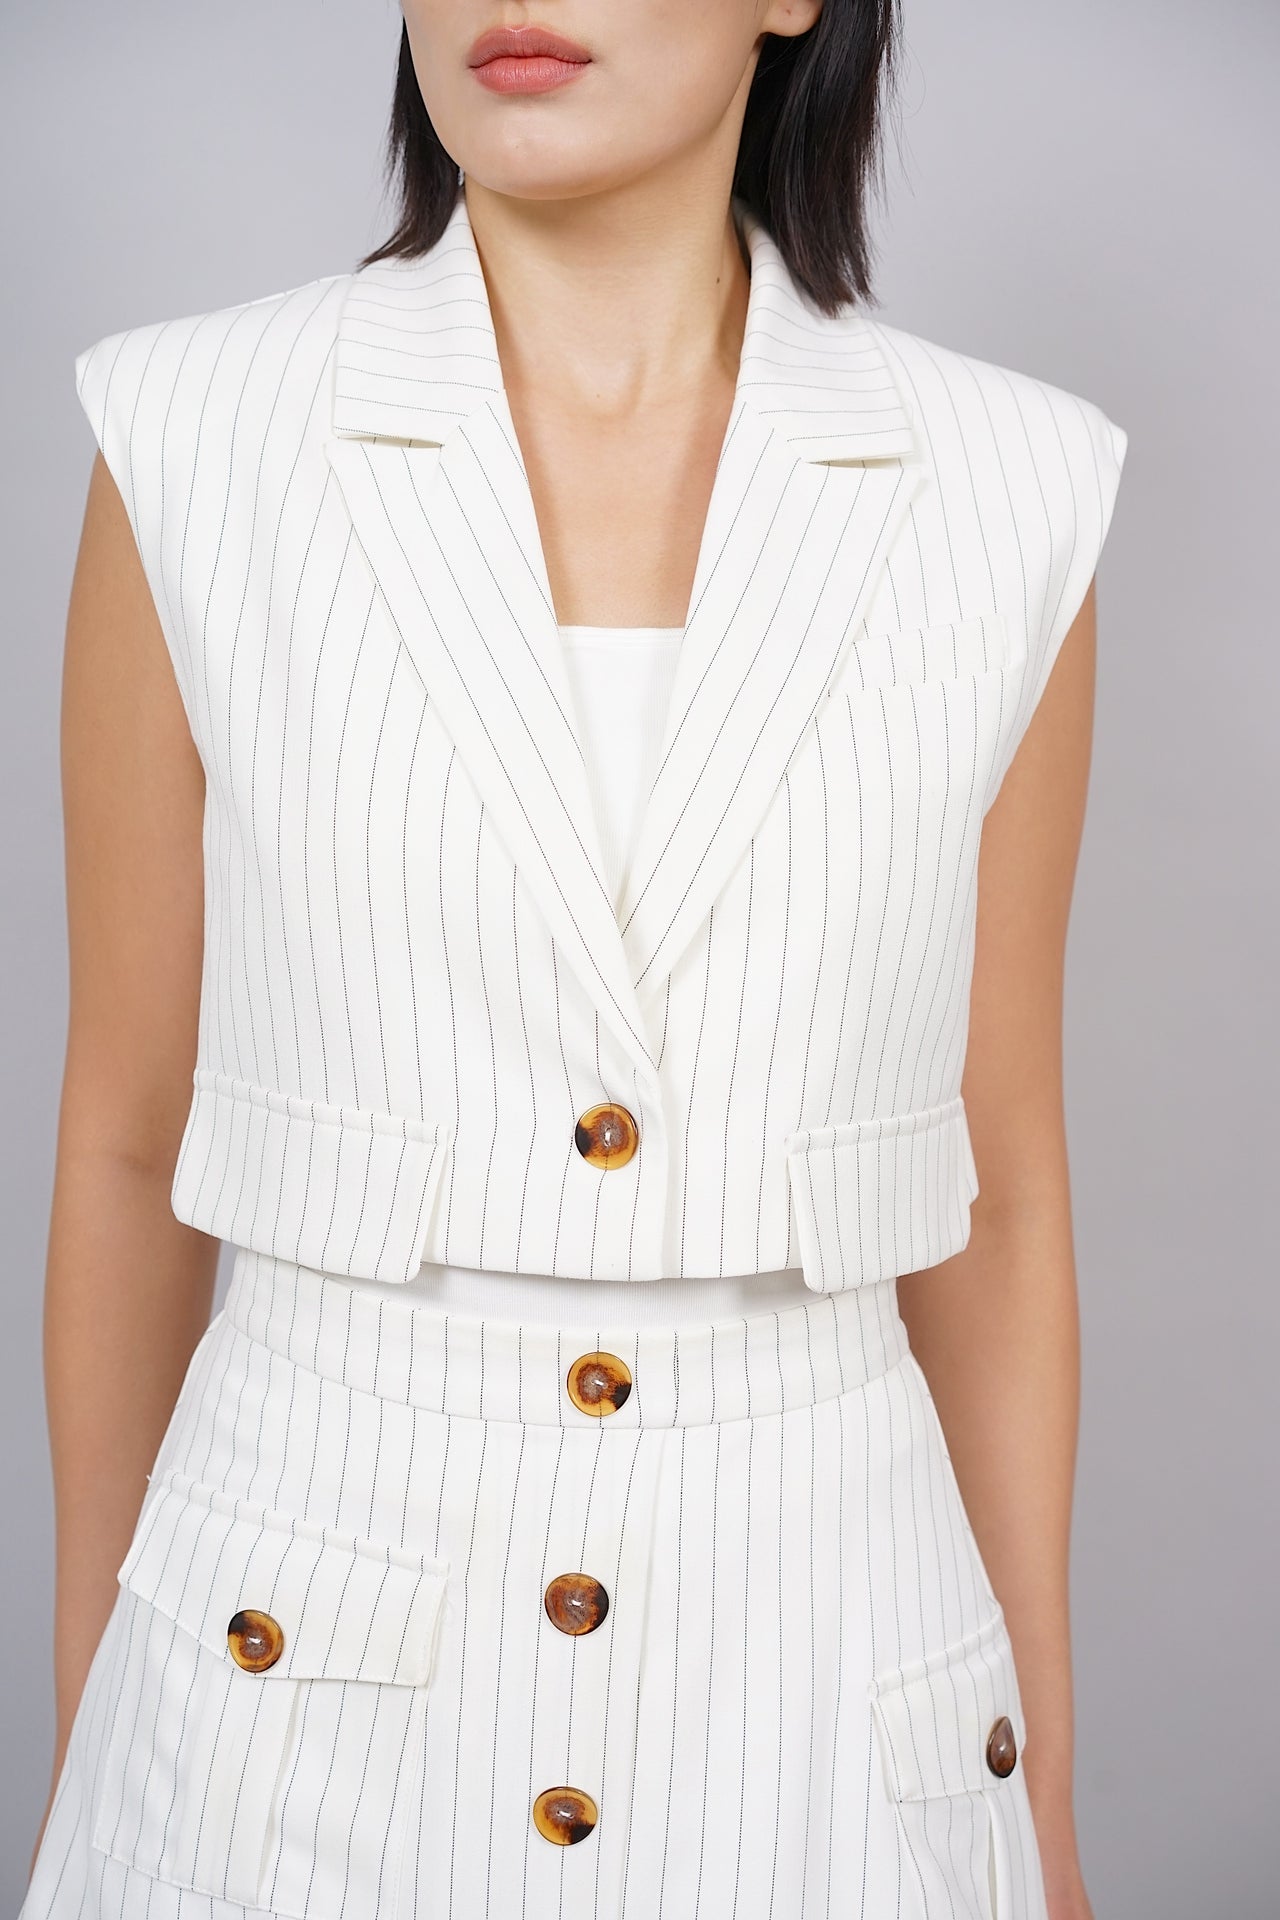 Cropped Buttoned Vest in White Pinstripes - Arriving Soon